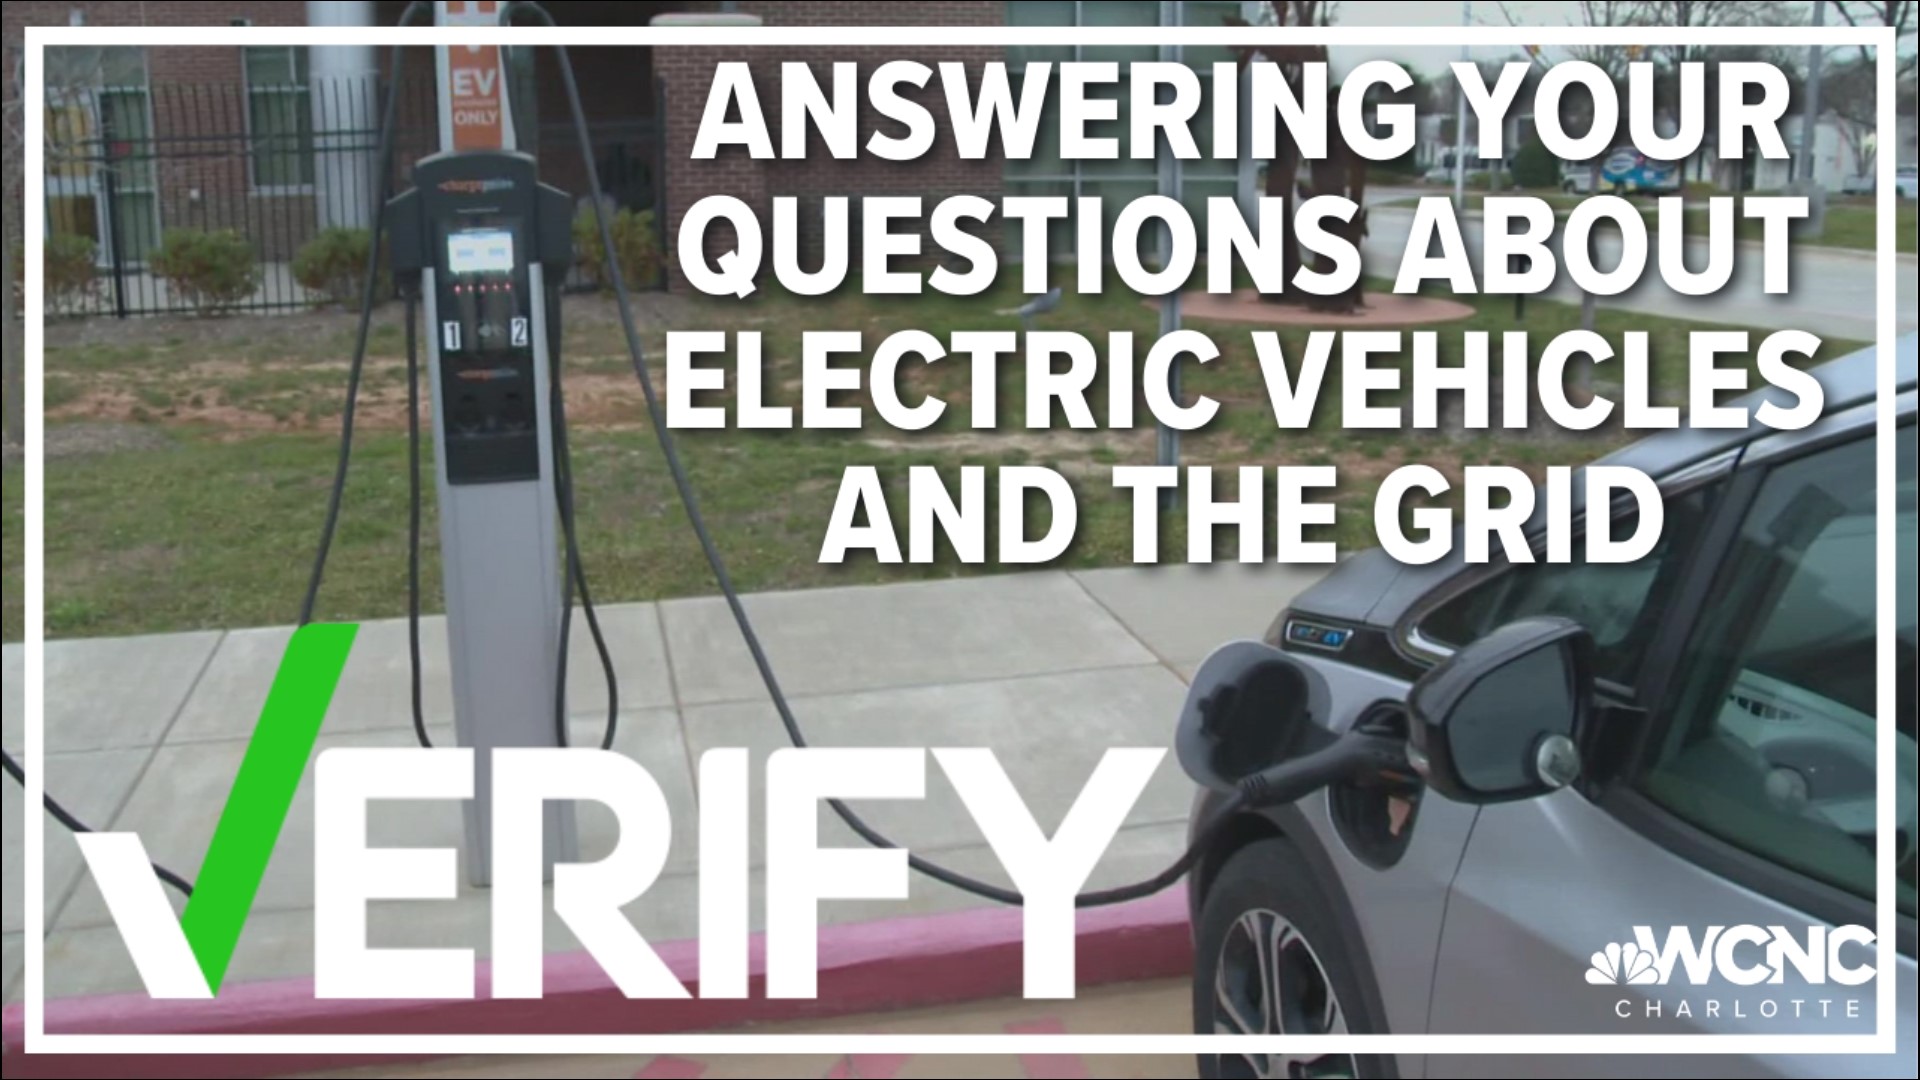 Yes, the grid can handle the demand if more people adopt EVs